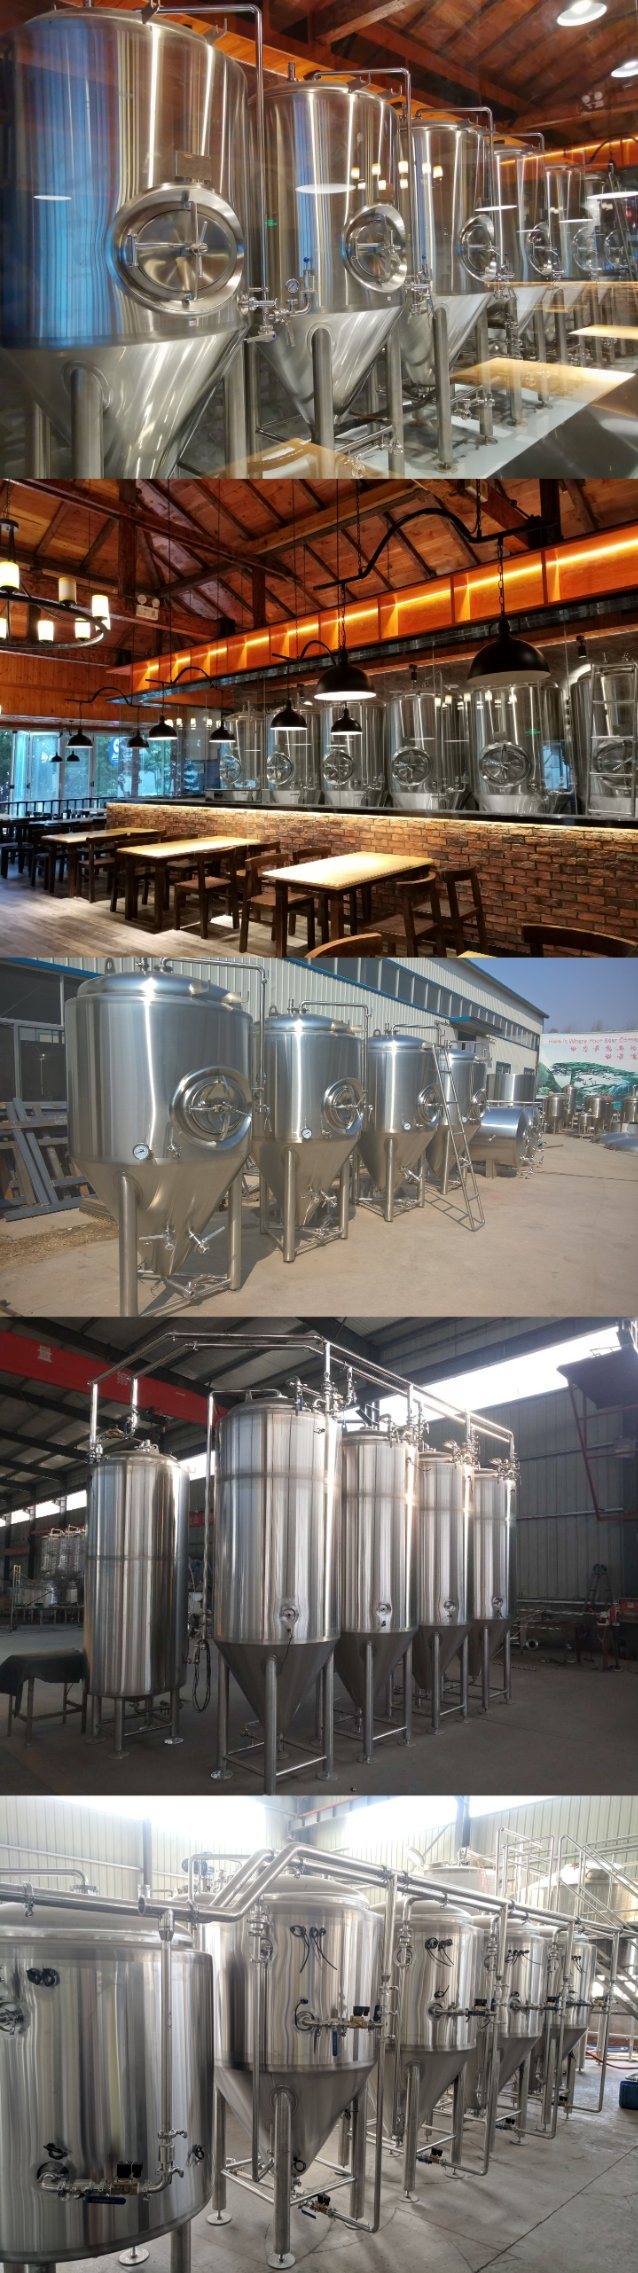 Craft Beer Brewing Equipment 3bbl Commercial Brewhouse Brewery